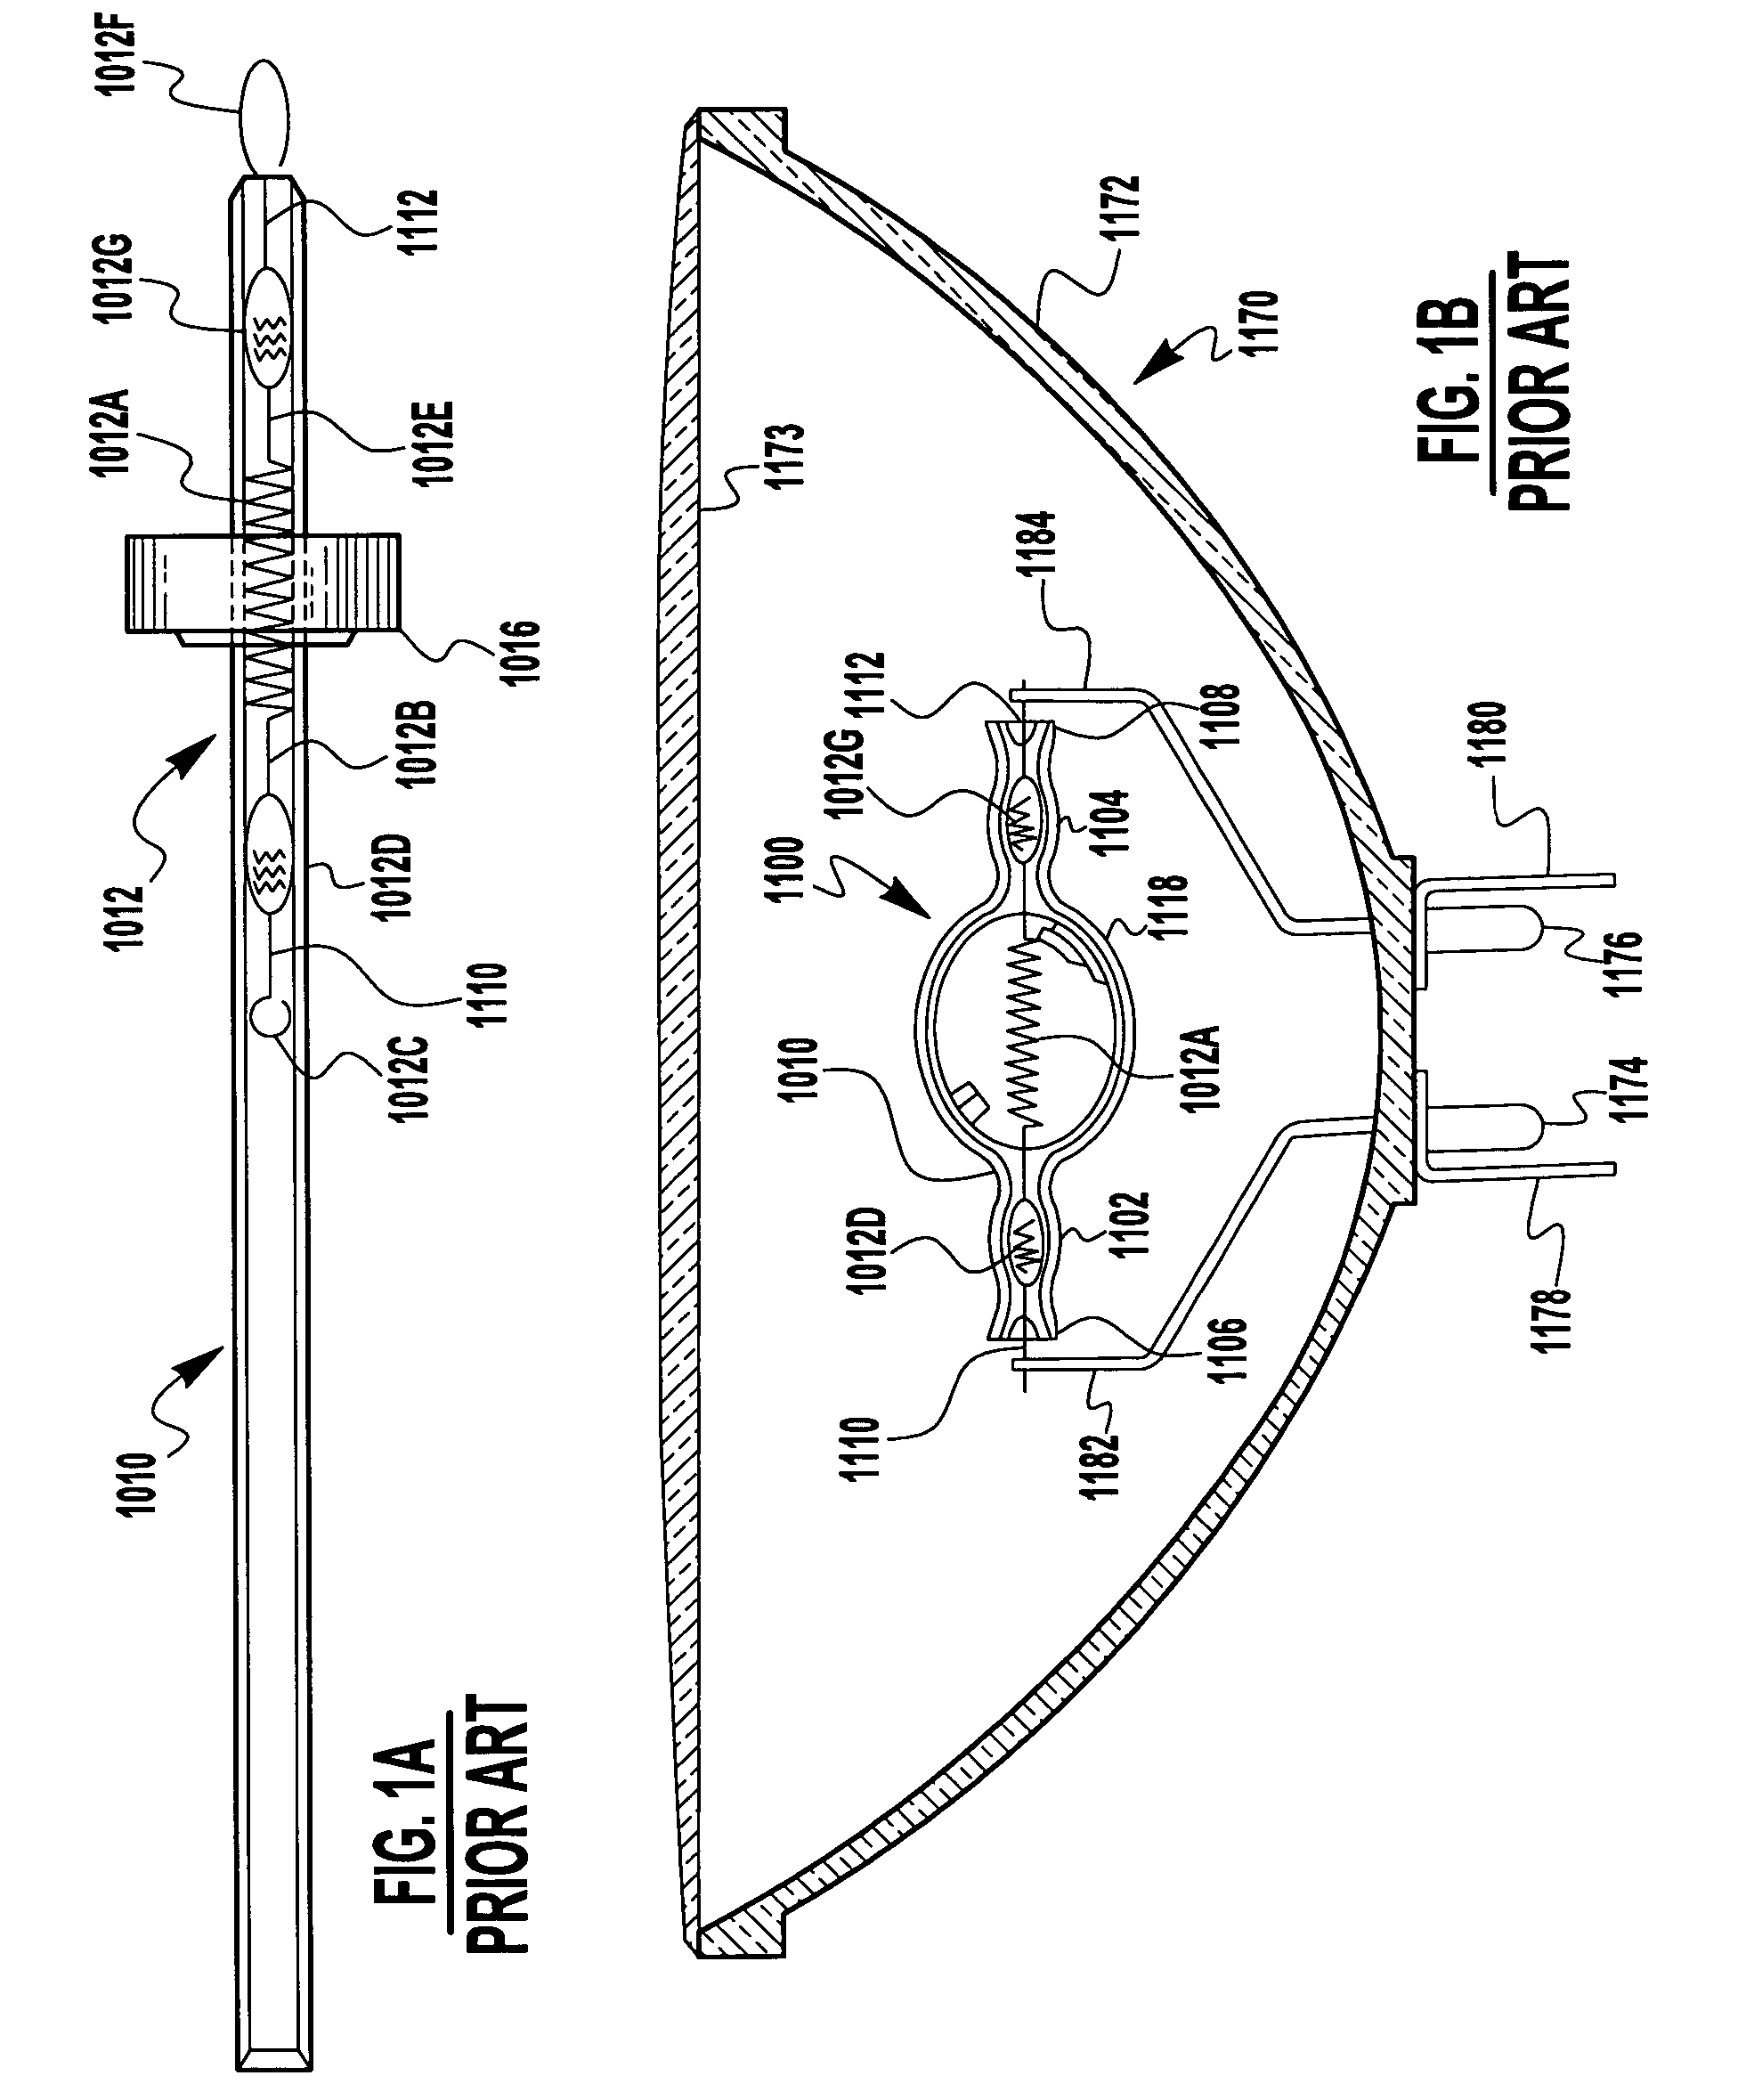 One piece foliated leads for sealing in light sources